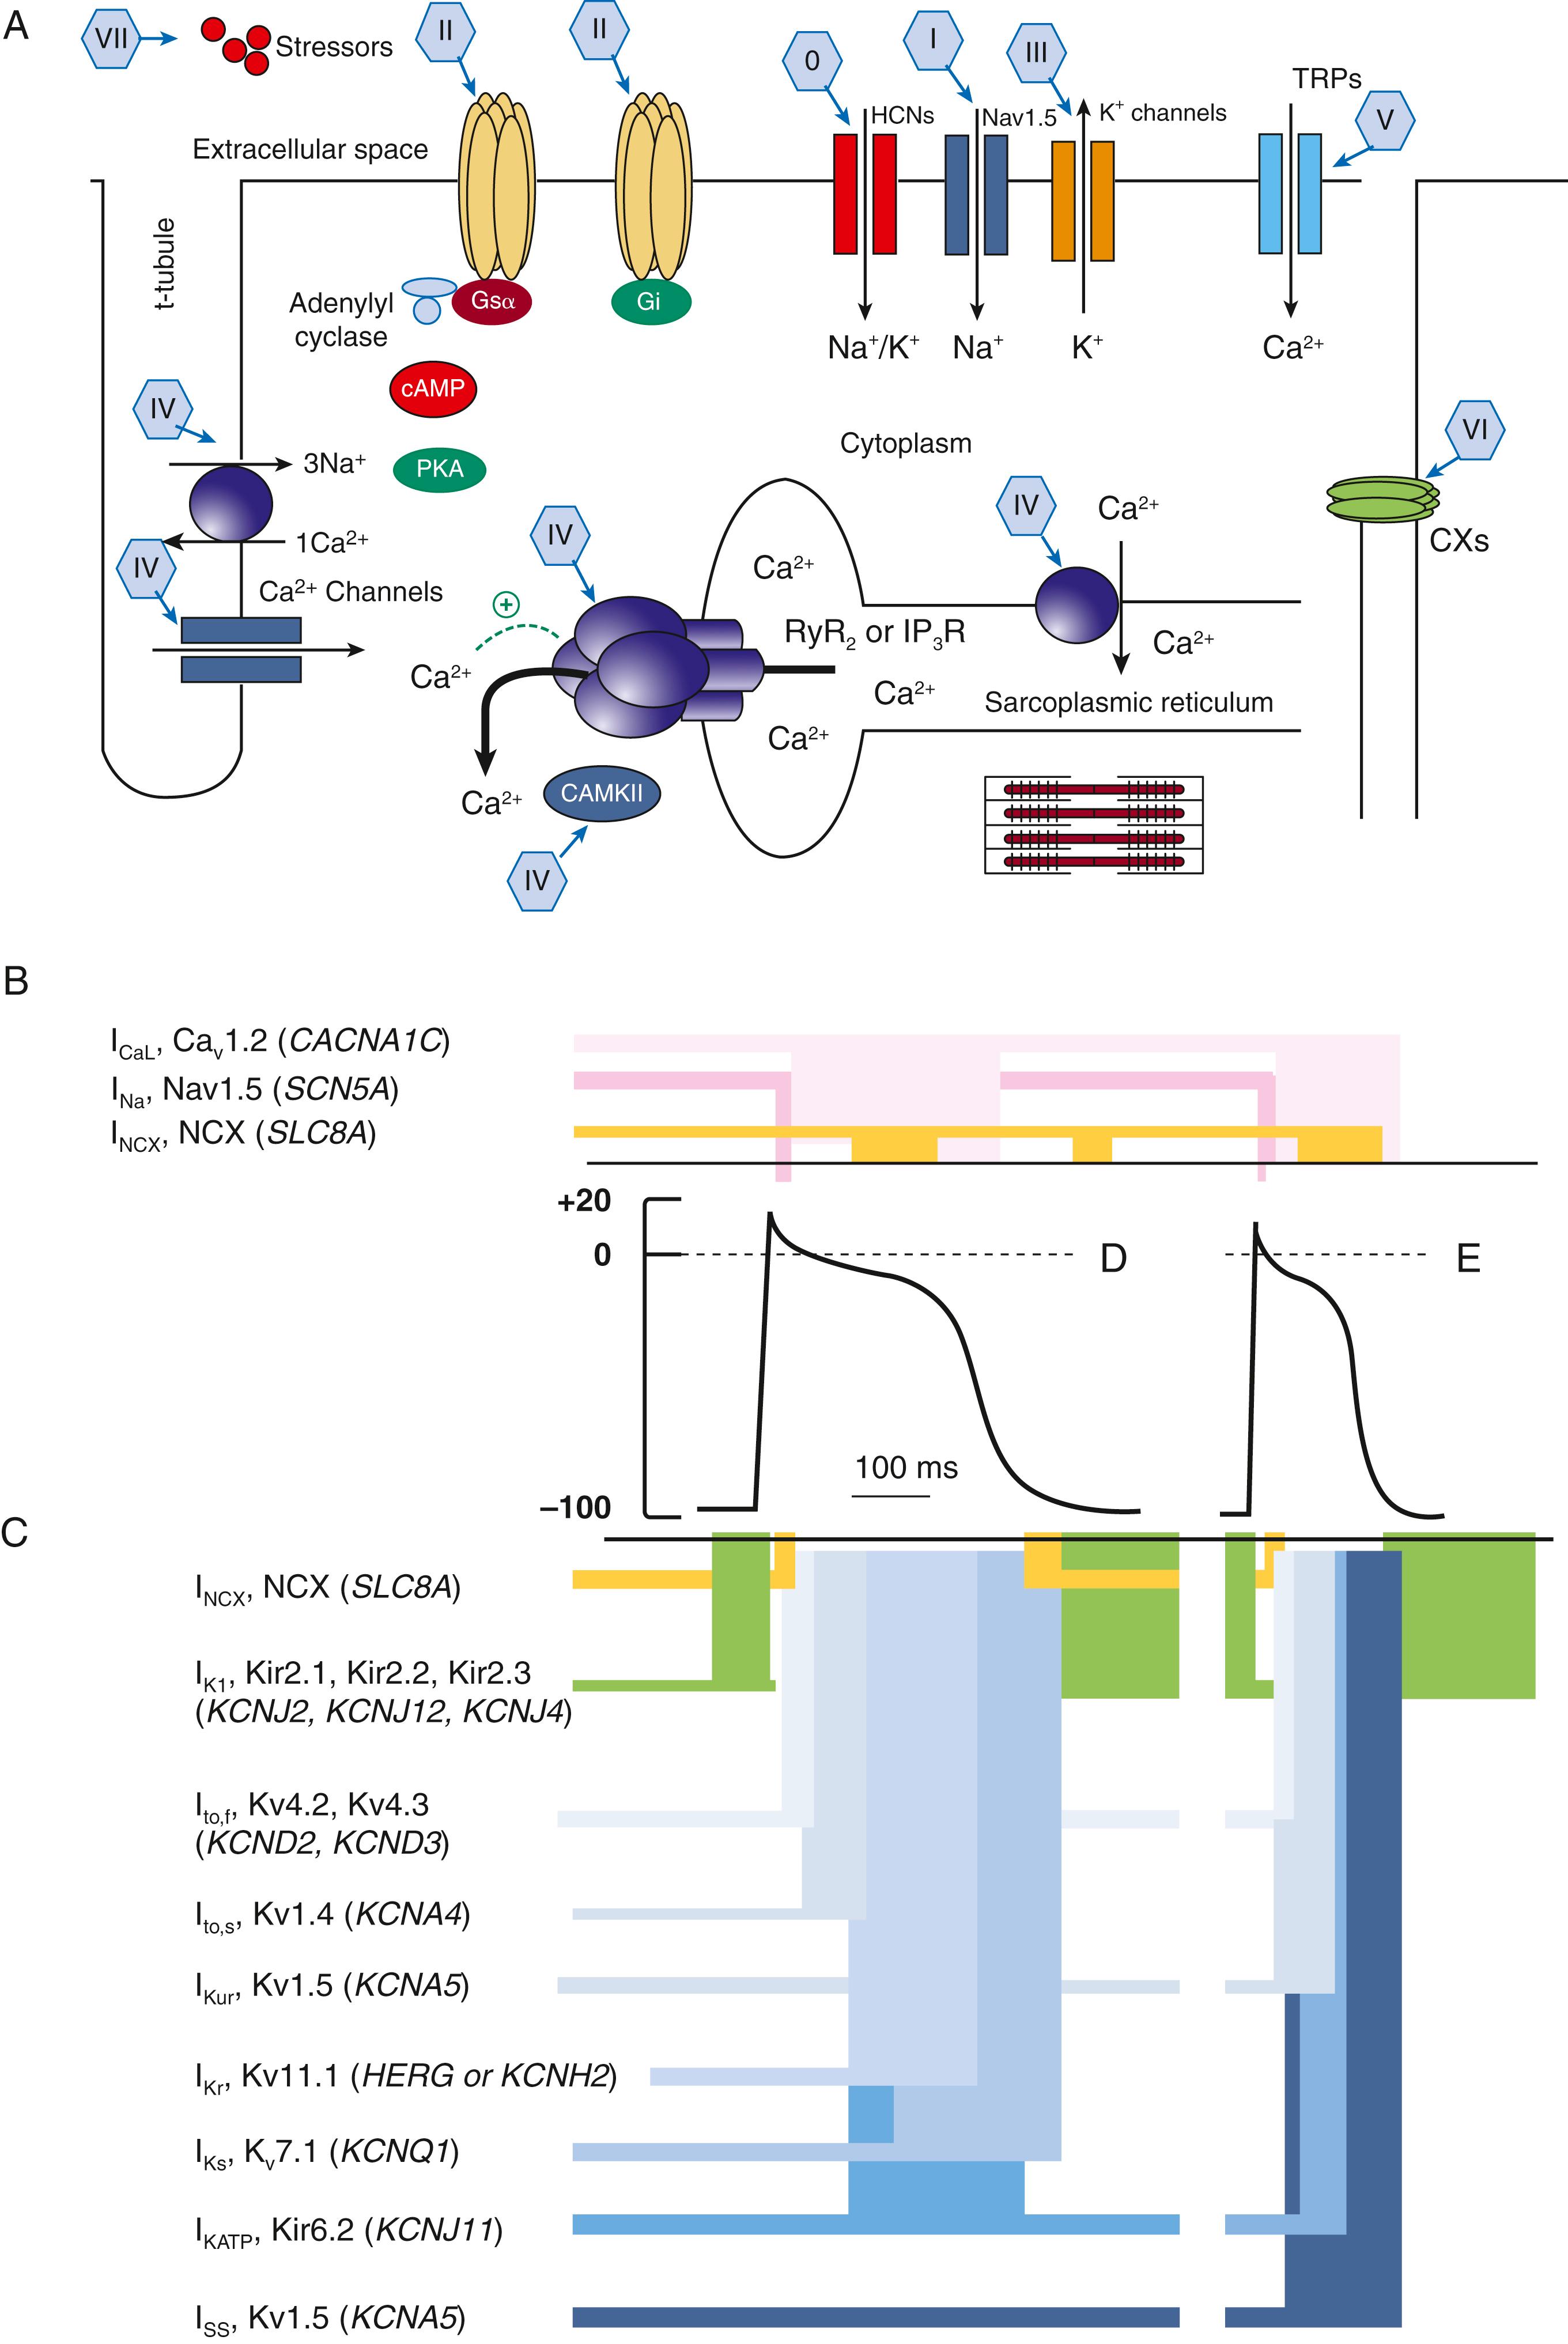 FIGURE 64.1, A, Surface and intracellular membrane ion channels, ion exchangers, transporters, and ionic pumps involved in cardiomyocyte electrophysiological excitation and activation; Roman numerals in blue hexagons refer to classes ( 0 , HCN channel blockers; I , voltage-gated sodium channel blockers; II , autonomic inhibitors/activators; III , potassium channel blockers/openers; IV , calcium handling modulators; V, mechanosensitive channel blockers; VI , gap junction channel blockers; VII , upstream target modulators). B to E, Activation and inactivation of ion channels, currents, underlying proteins, and encoding genes and their contributions to ( B ) inward depolarizing and ( C ) outward repolarizing currents inscribing cardiac action potentials (APs). Ventricular ( D ) and atrial ( E ) APs comprise rapid depolarizing (phase 0), early repolarizing (phase 1), brief (atrial) or prolonged (ventricular) phase 2 plateaus (phase 2), phase 3 repolarization, and phase 4 electric diastole. In these, inward Na + or Ca 2+ currents drive phase 0 depolarization and Ca 2+ current maintains the phase 2 plateau ( B ), and a range of outward K + currents ( C ) drive phase 1 and phase 3 repolarization. Phase 4 resting potential restoration is accompanied by a refractory period required for Na + channel recovery. The resulting wave of electric activity and refractoriness is propagated through successive sino-atrial node, atrial, atrioventricular, Purkinje, and endocardial and epicardial ventricular cardiomyocytes. CaMKII indicates calcium/calmodulin kinase II; Cx , connexin; Gi , inhibitory G protein; Gs , stimulatory G-protein; HCN , hyperpolarization-activated cyclic nucleotide-gated channel; Nav1.5 , cardiac Na + channel protein; PKA , protein kinase A; RyR2 , cardiac ryanodine receptor type 2; TRP , transient receptor potential channel.